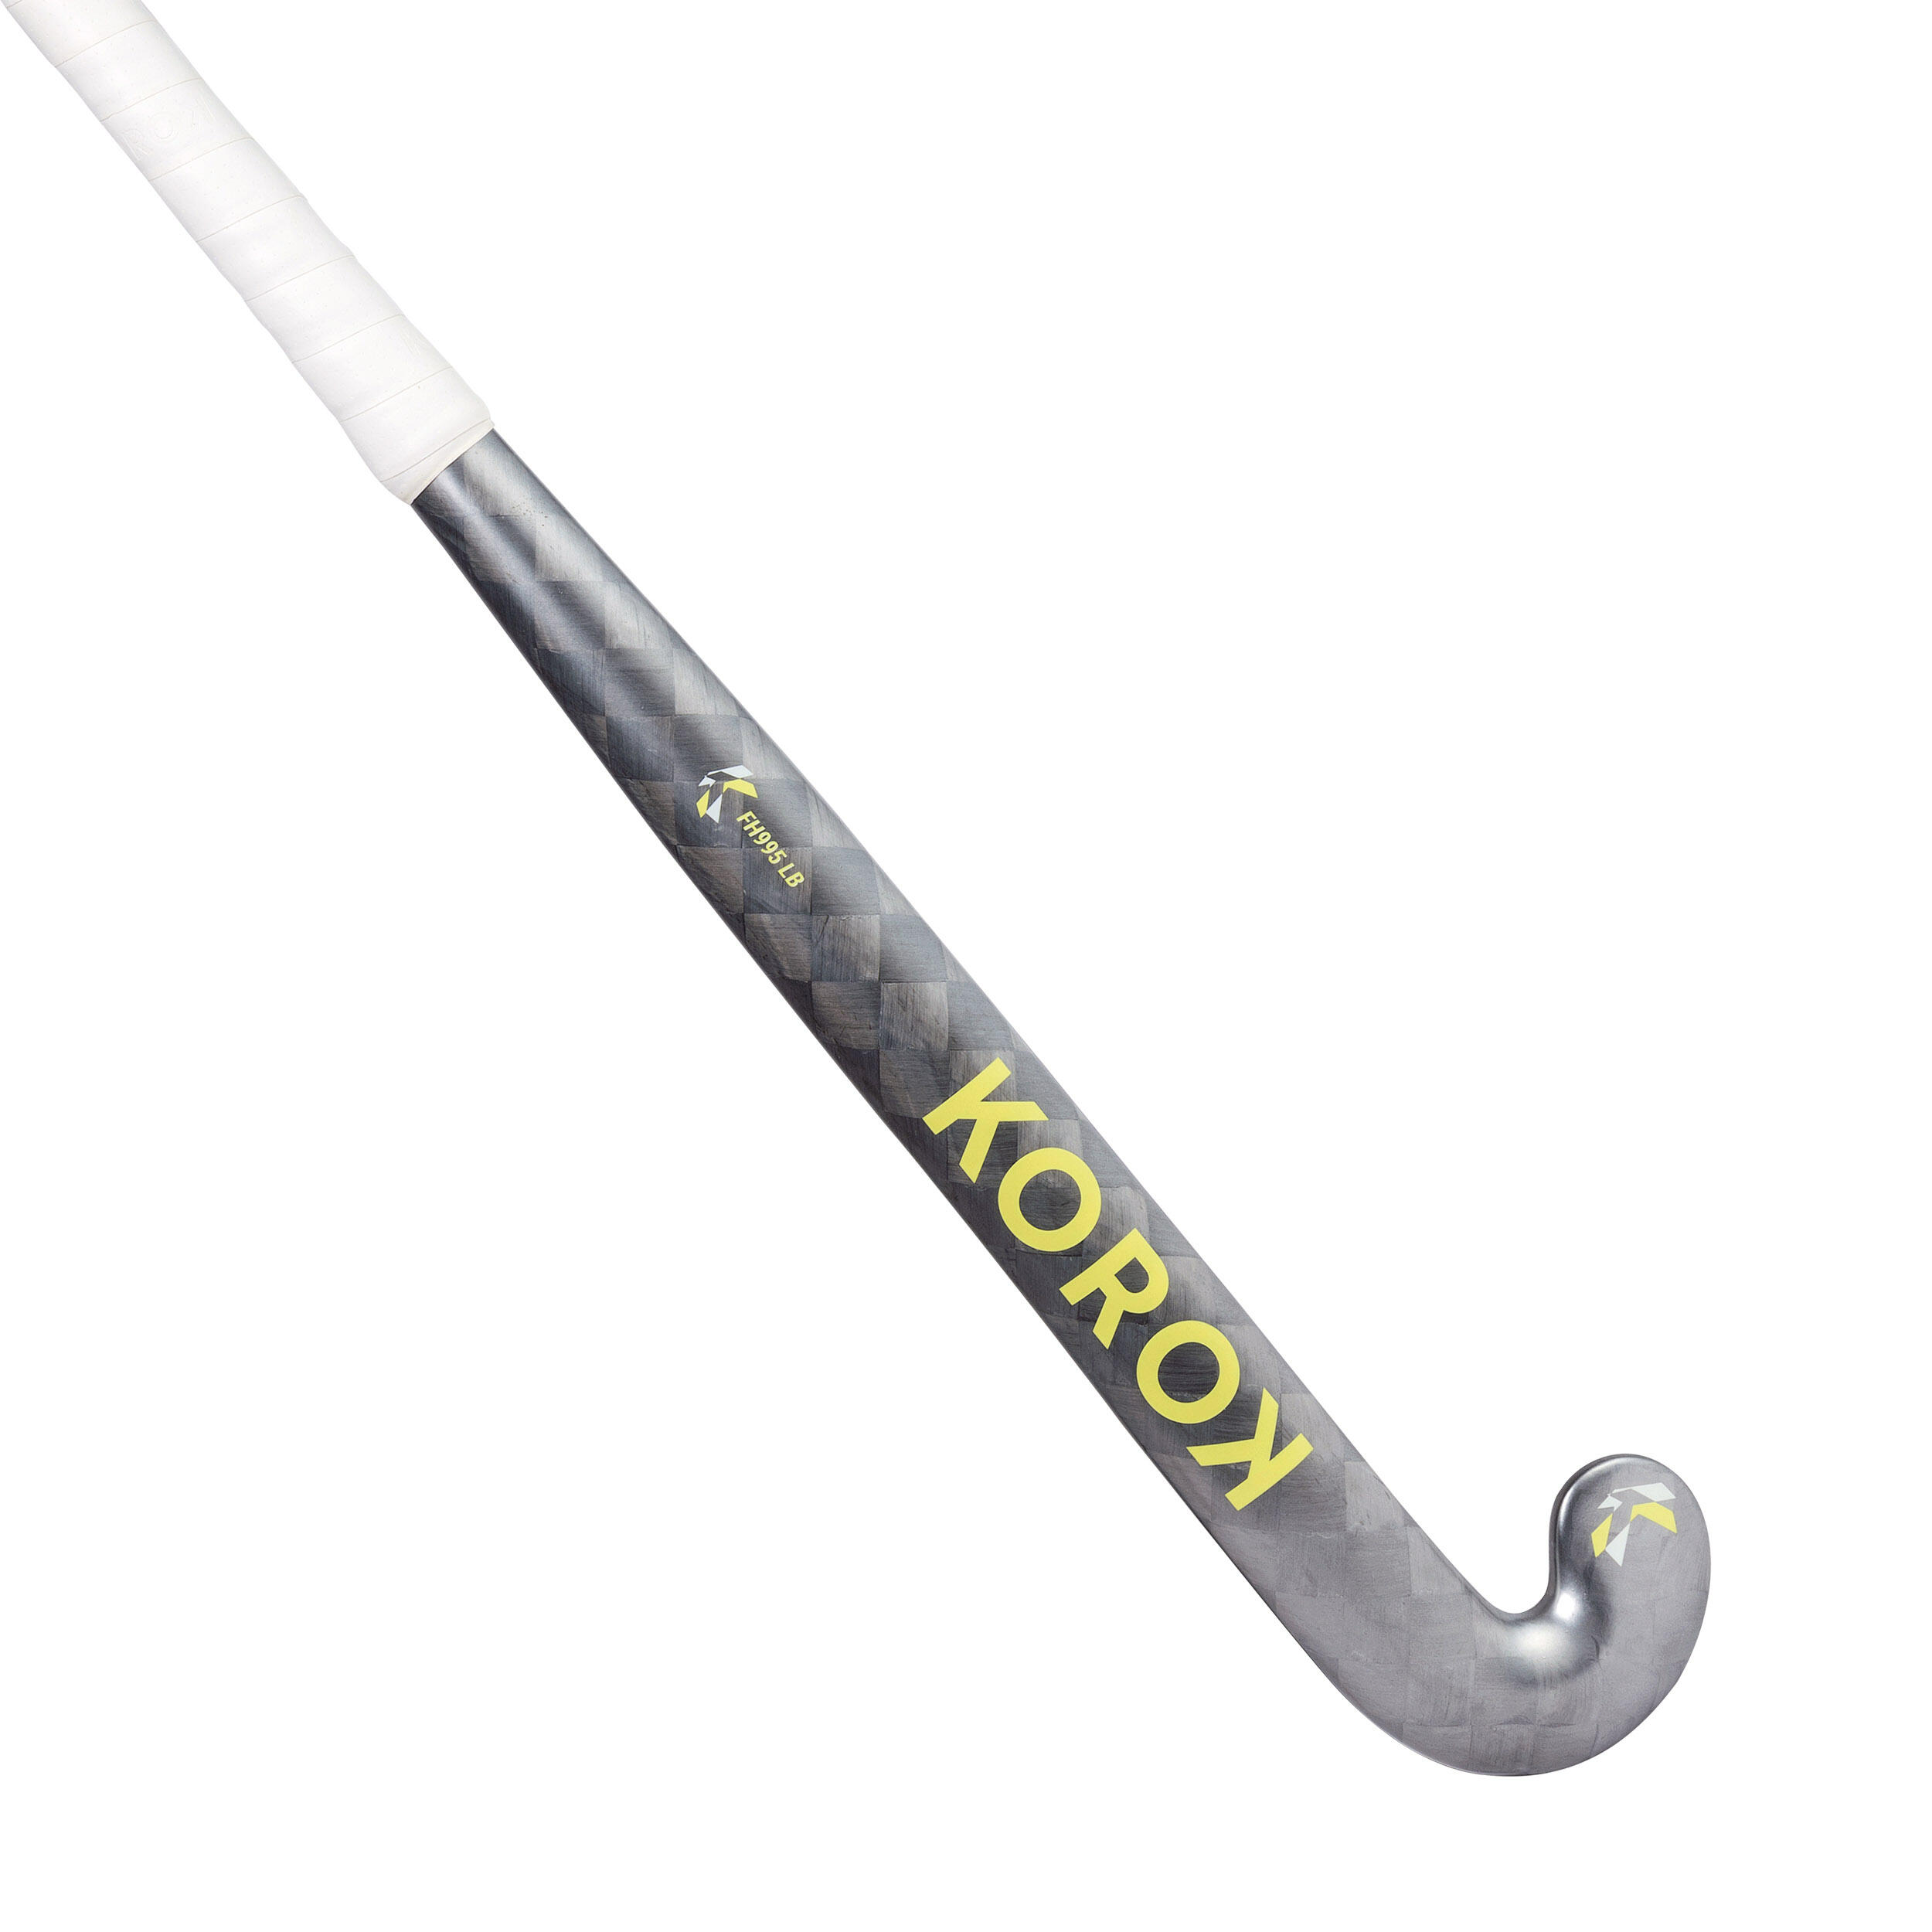 Adult Advanced 95% Carbon Low Bow Field Hockey Stick FH995 - Grey/Yellow 1/12